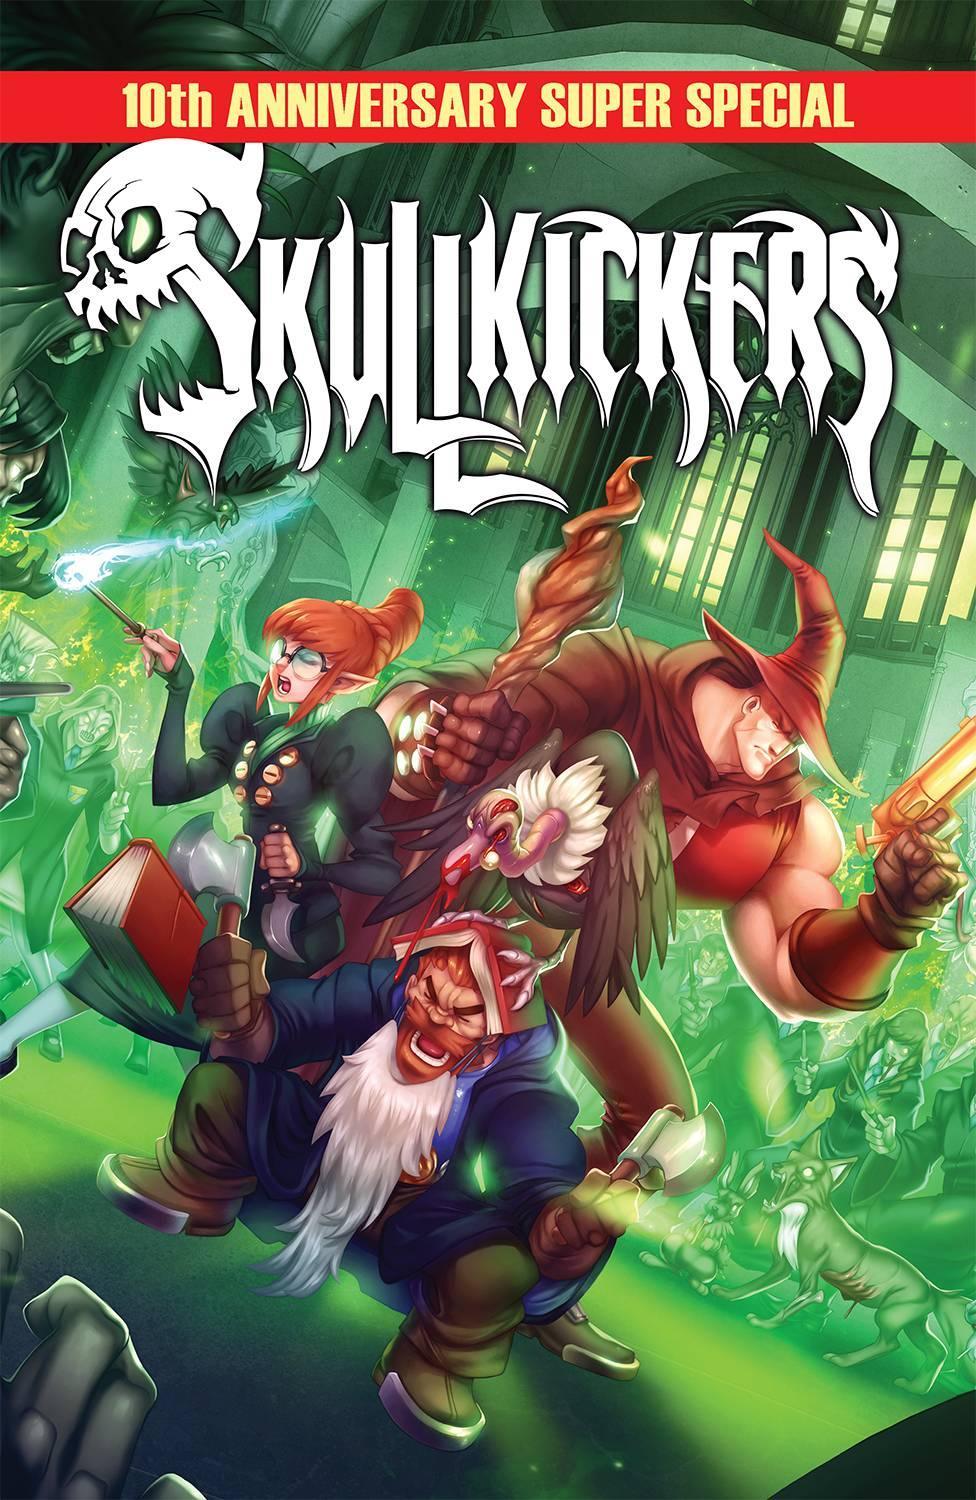 SKULLKICKERS SUPER SPECIAL #1 (ONE-SHOT ANNV SPECIAL) - Kings Comics